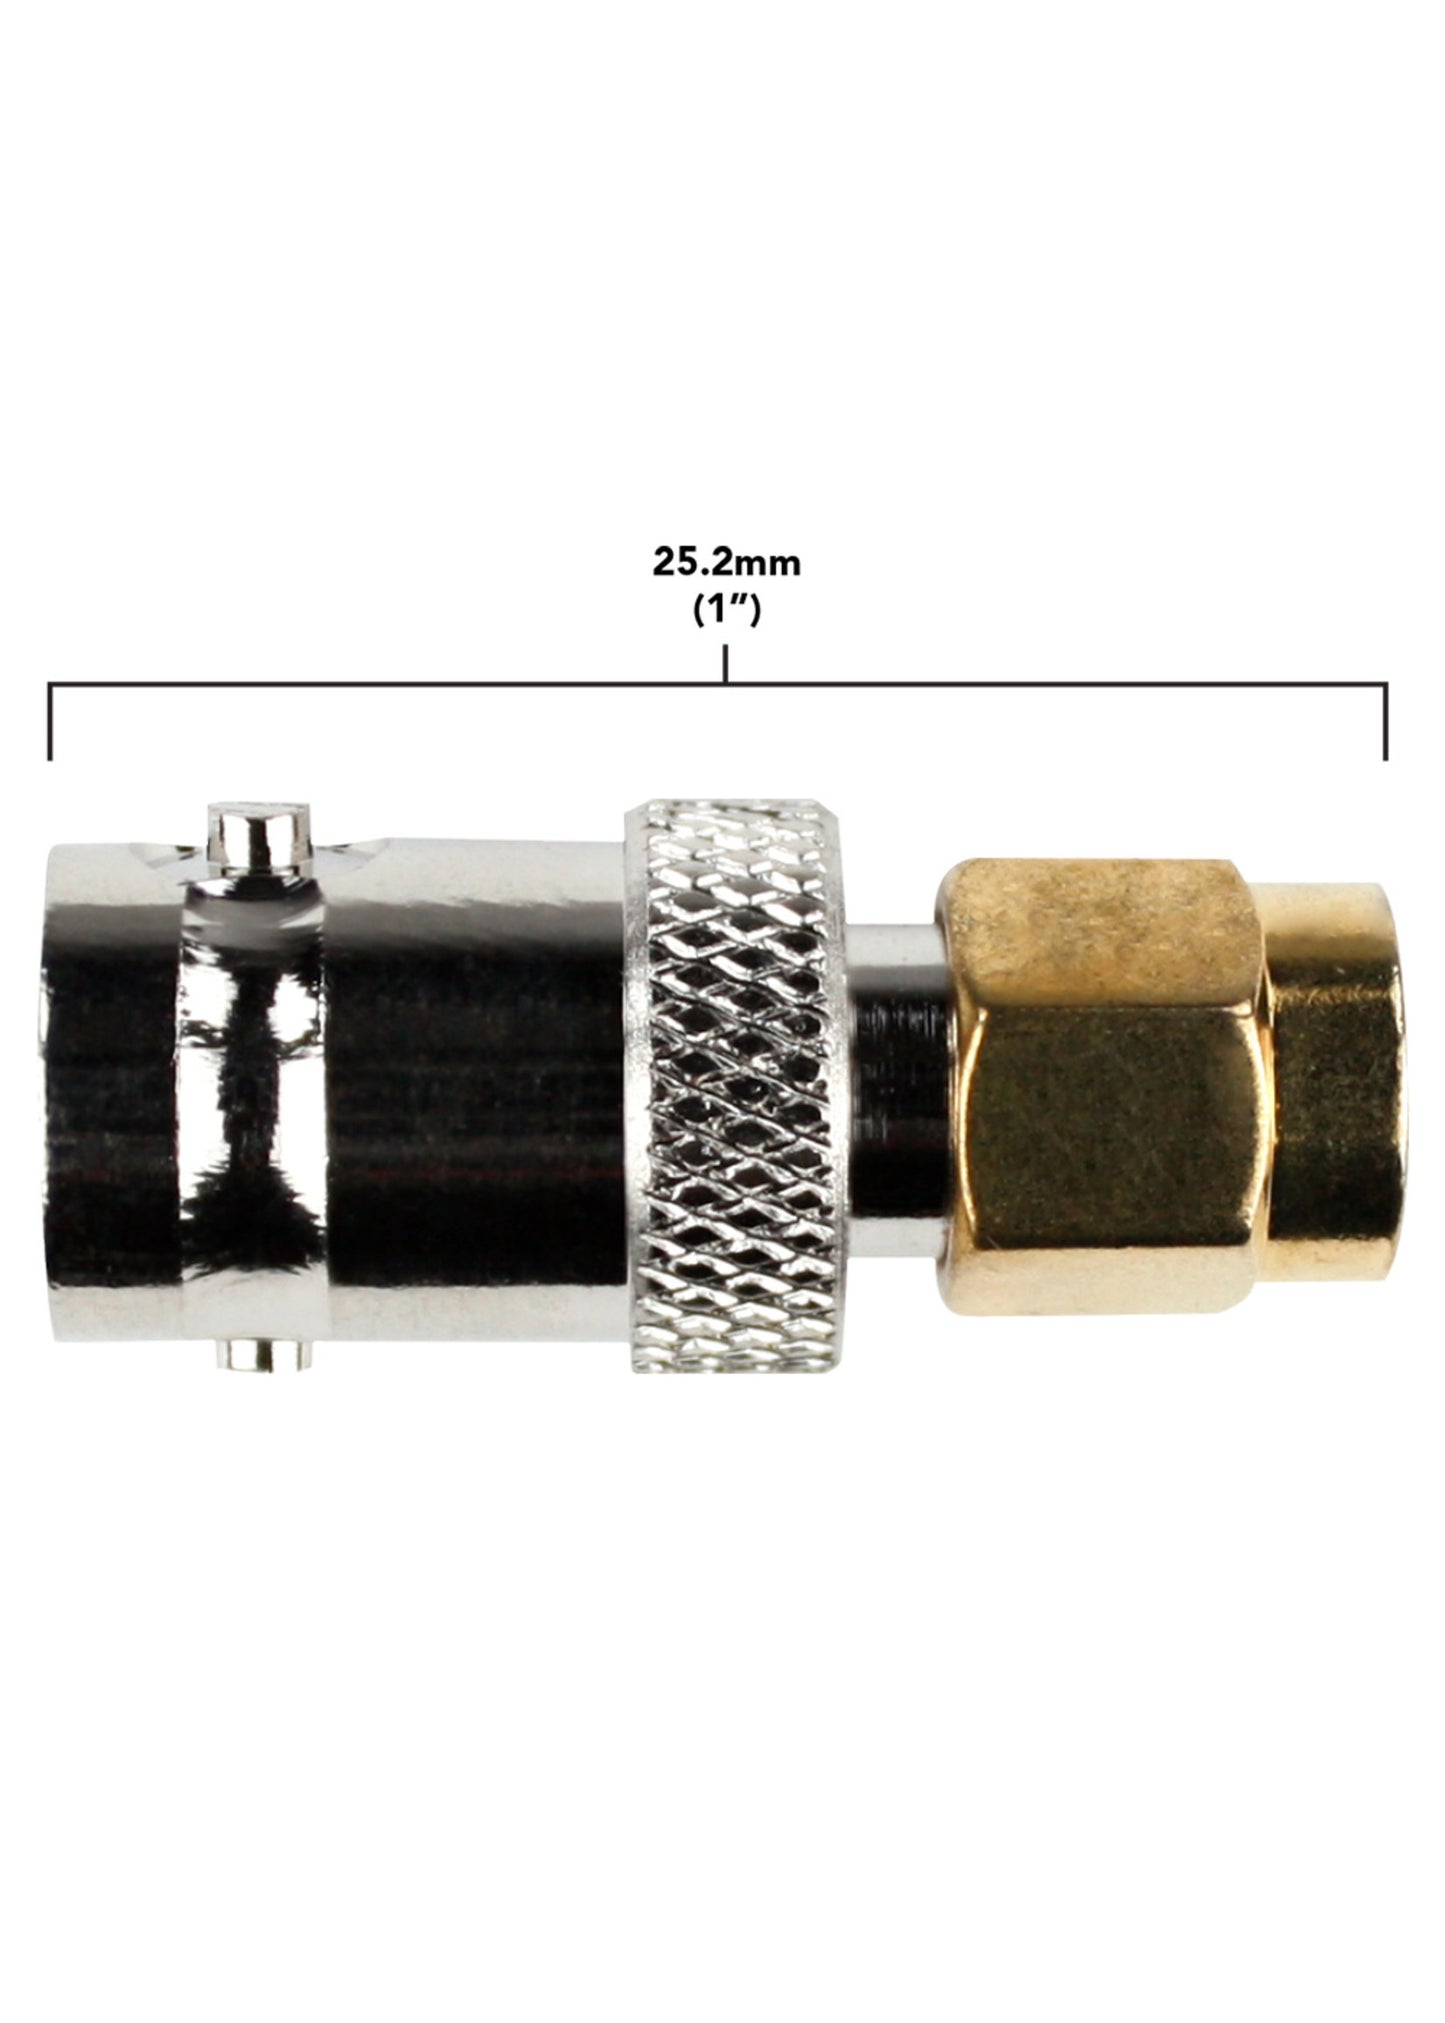 Female BNC to Male SMA Connectors (5 pack)